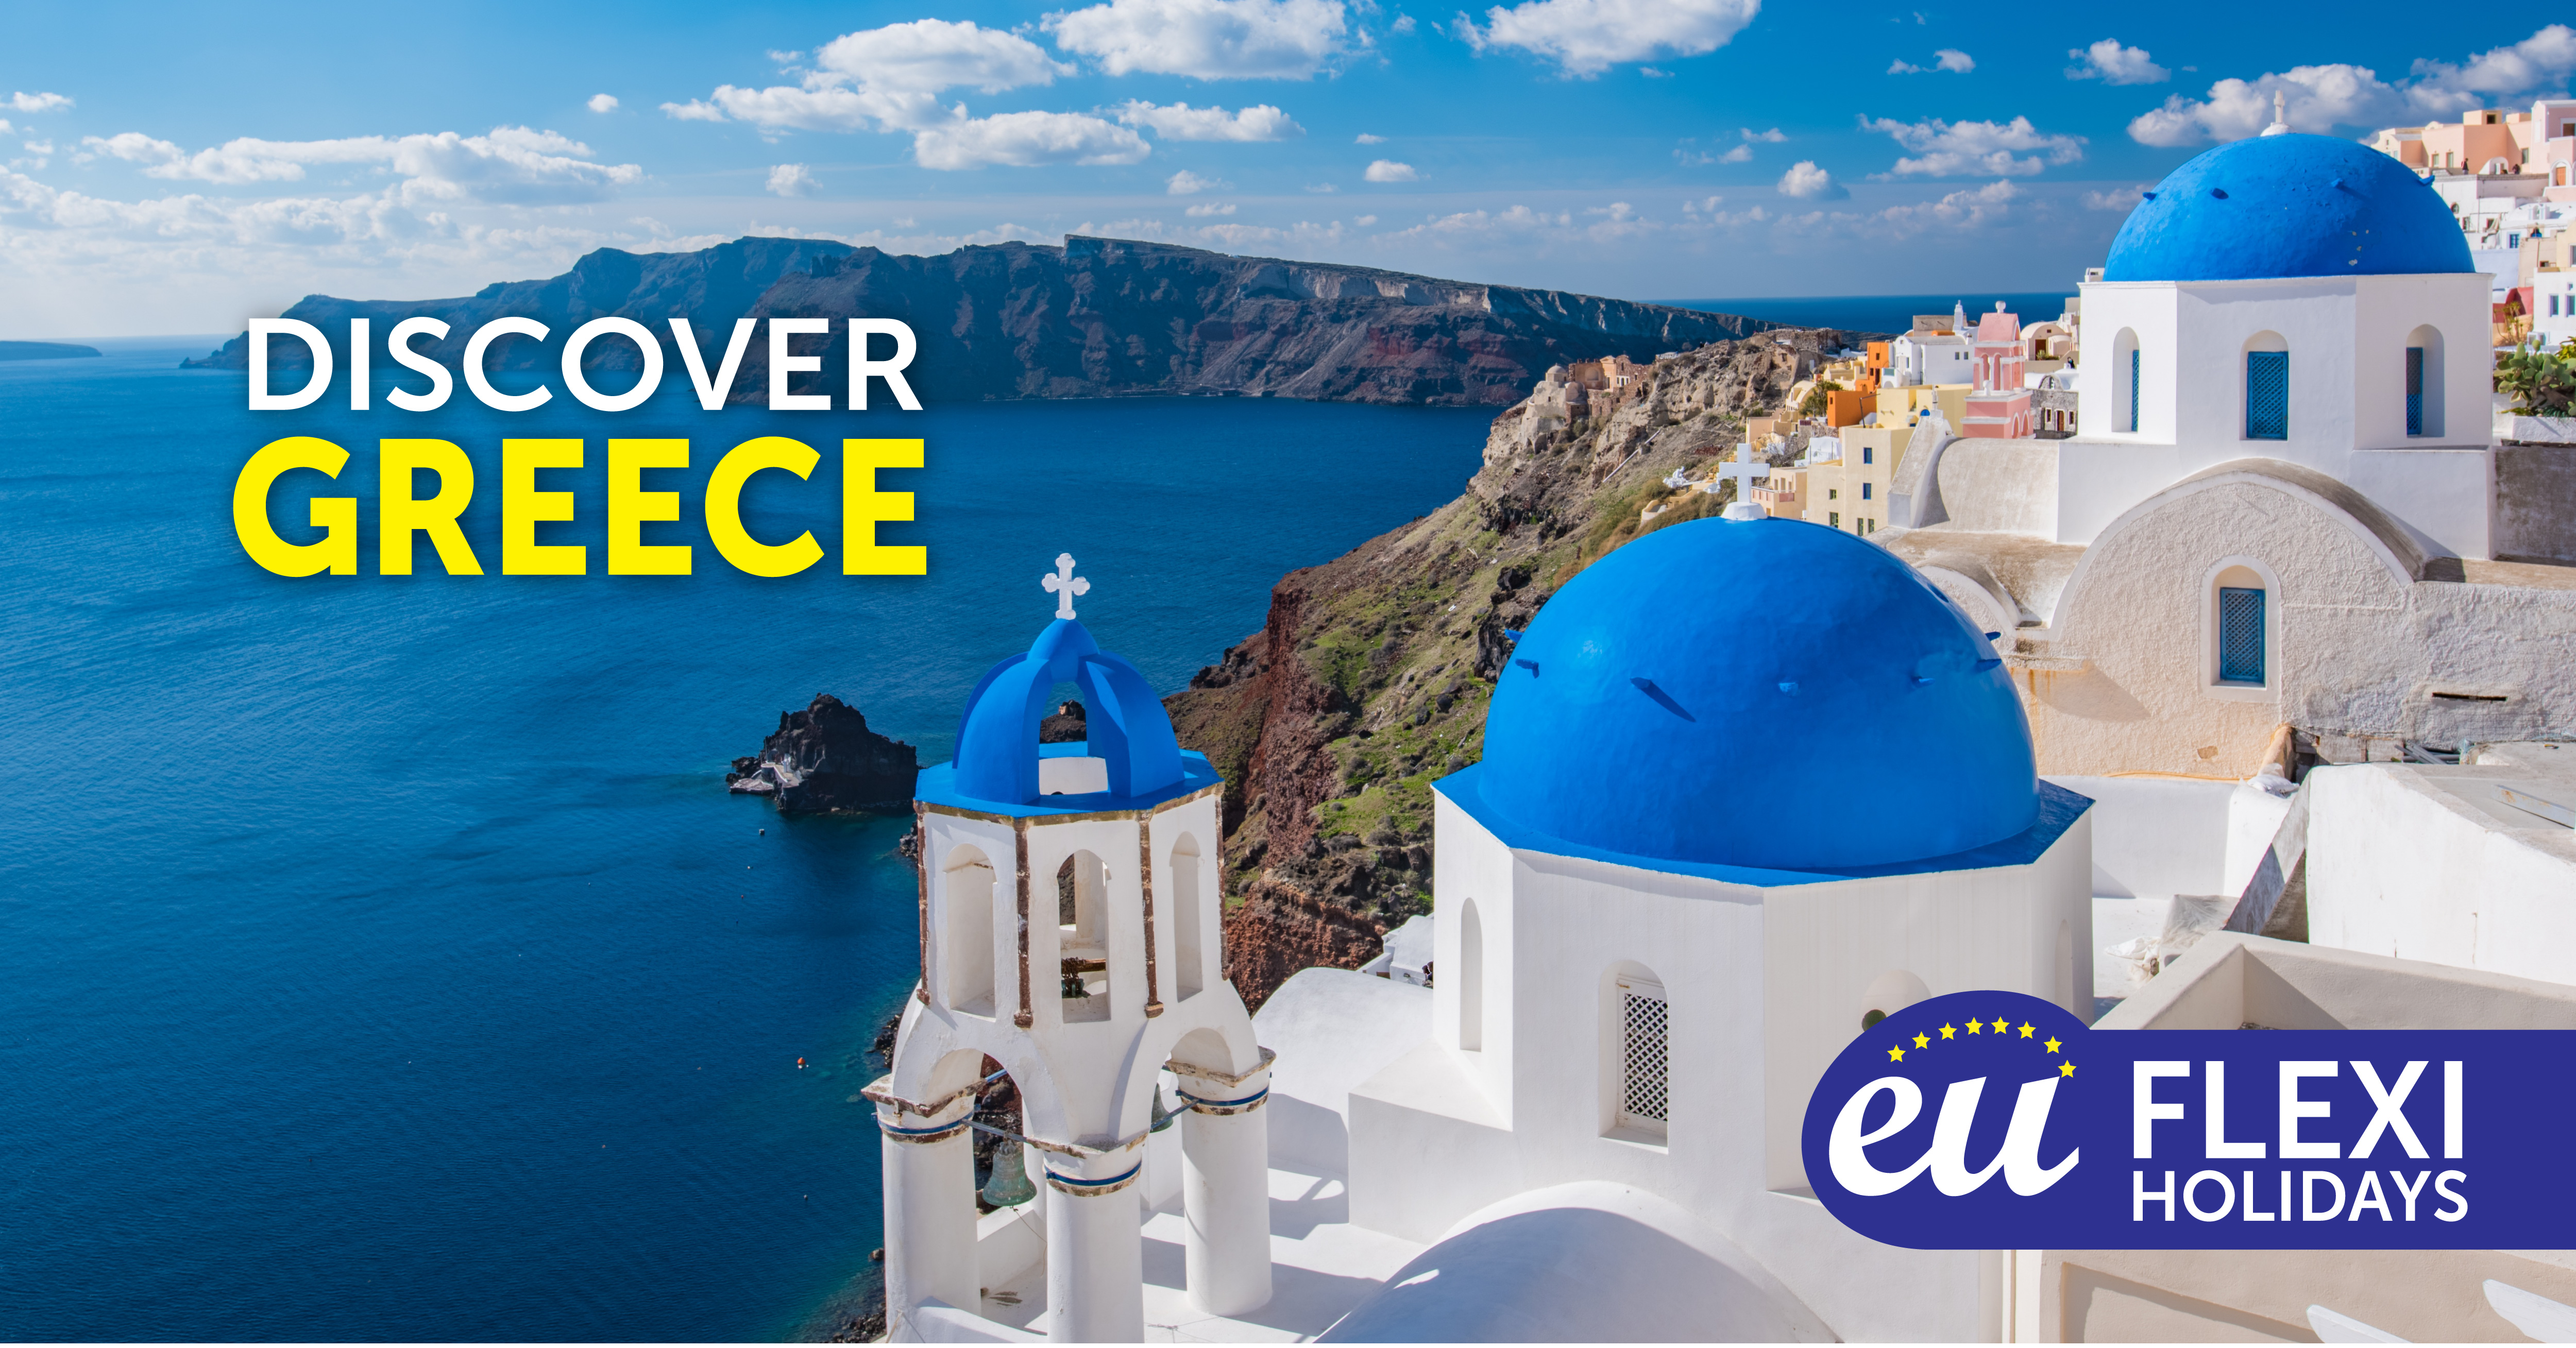 Greece tours from Singapore